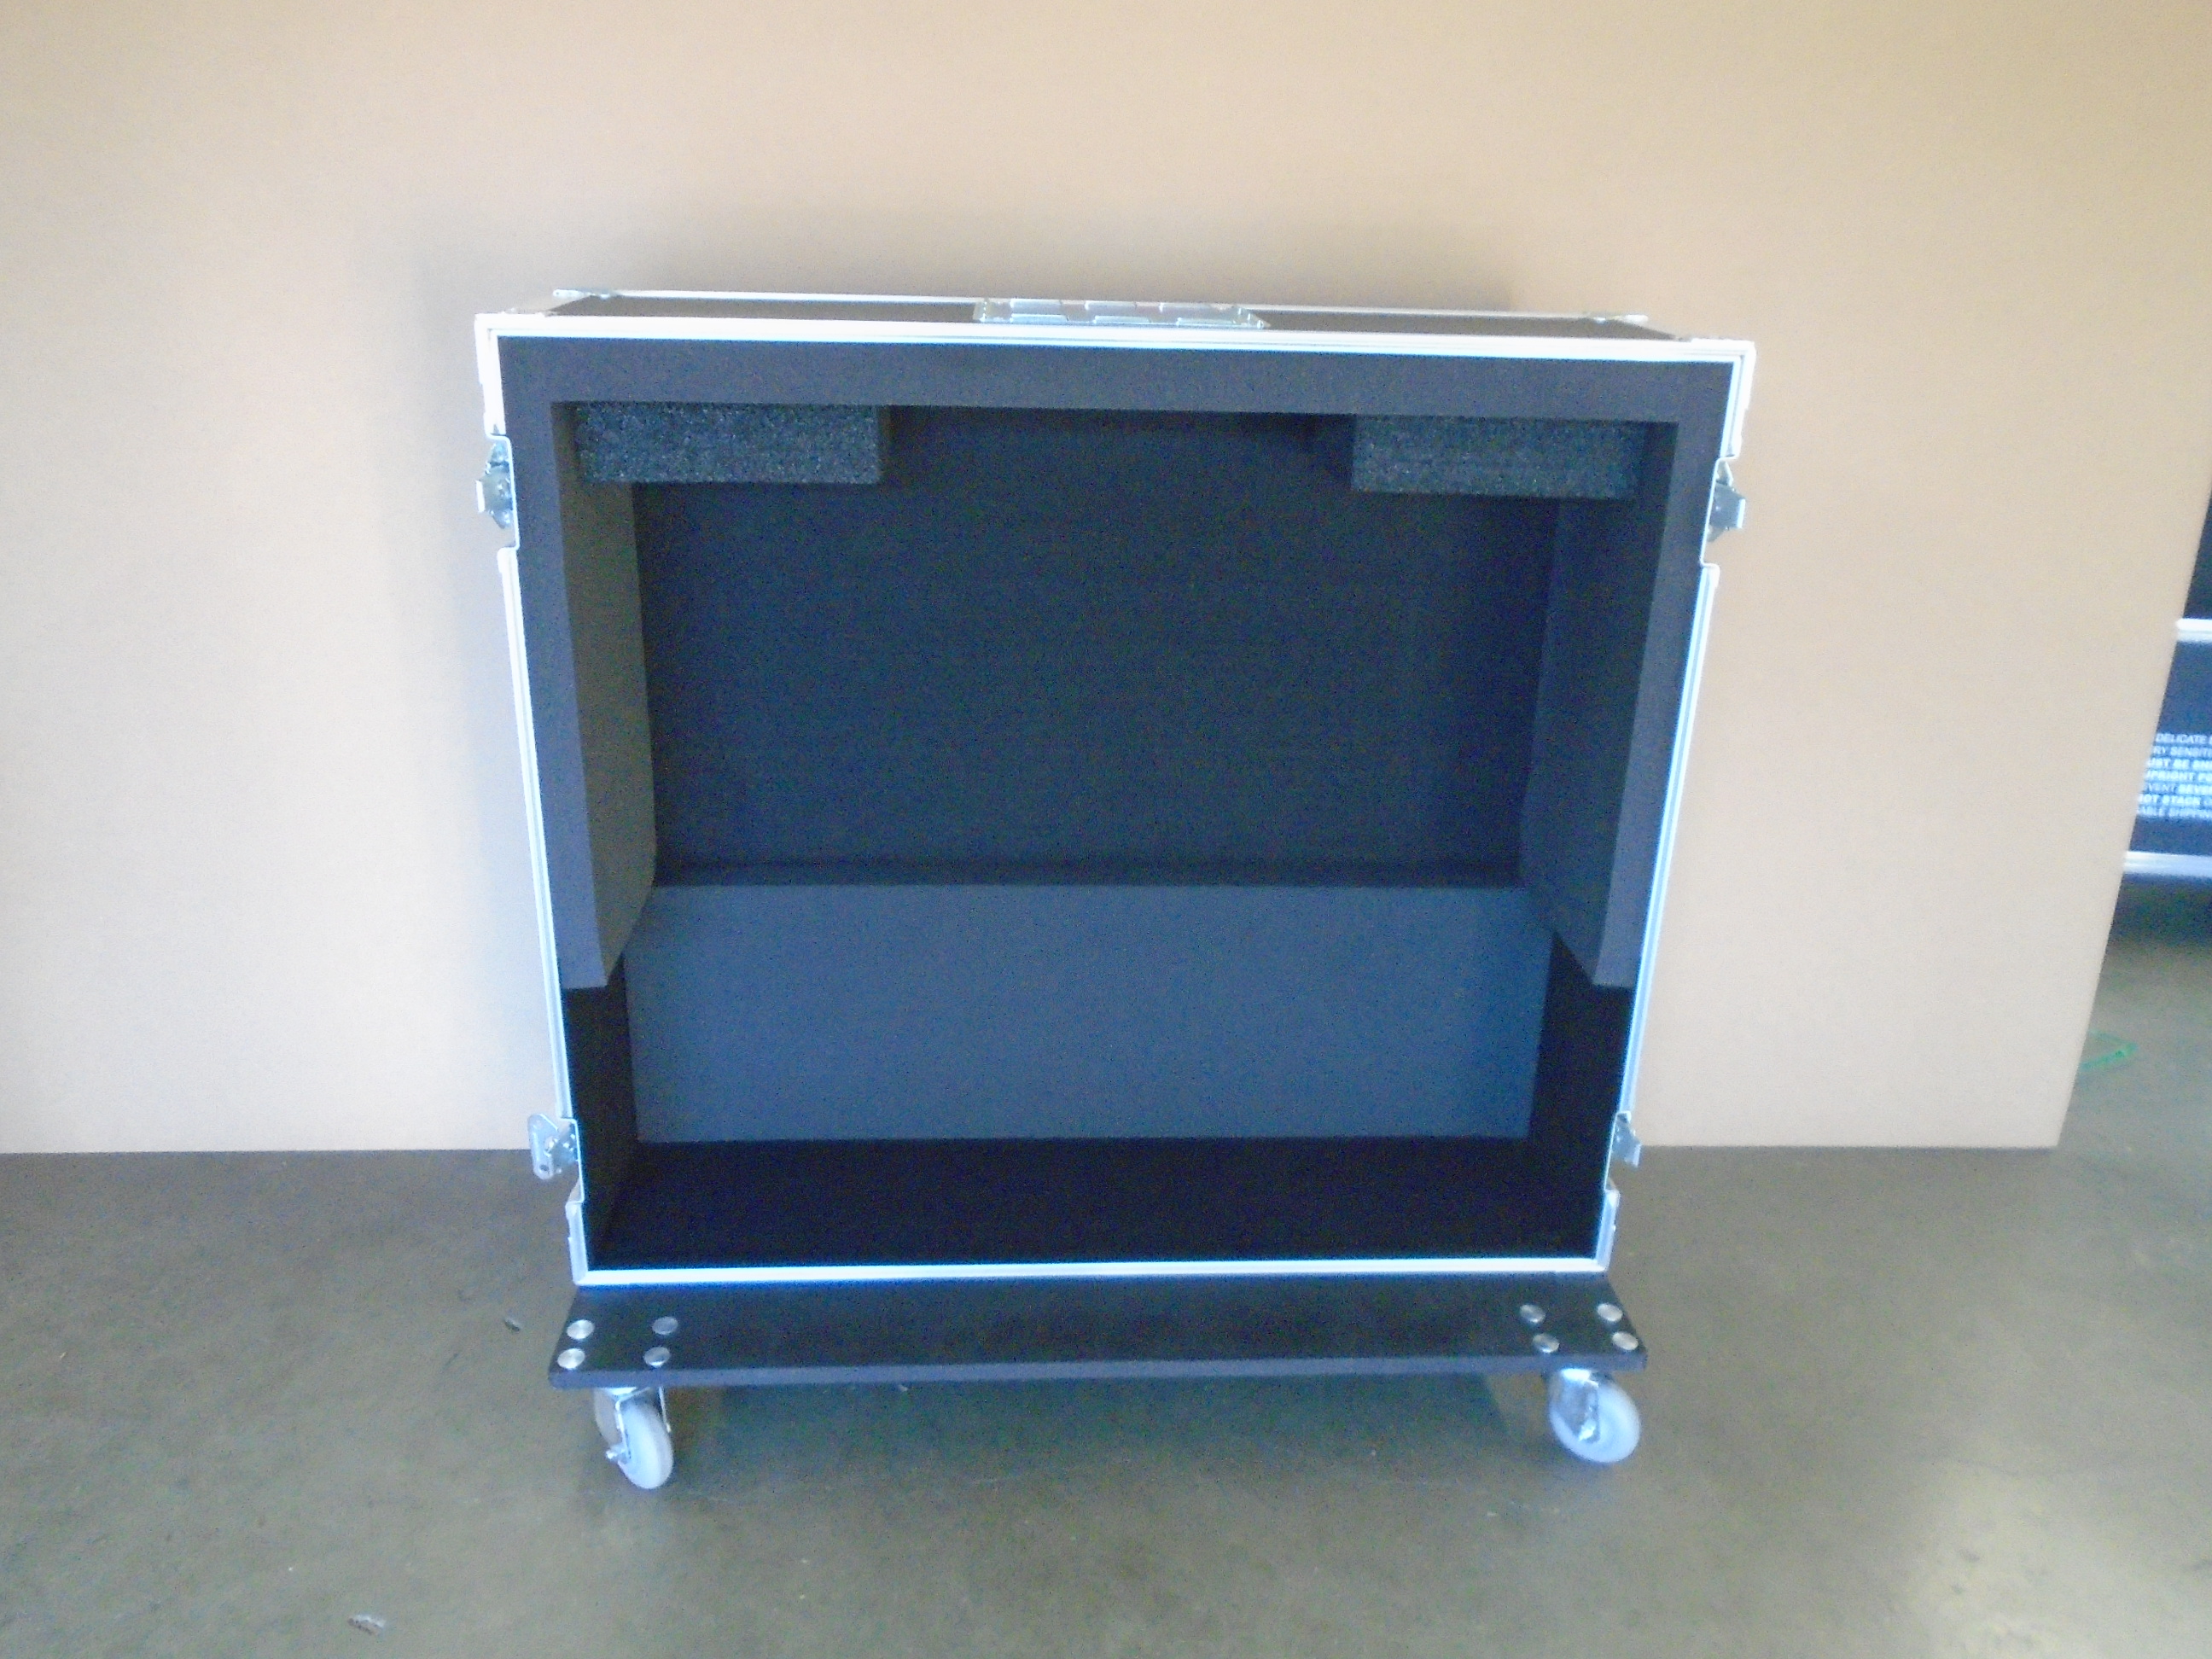 Print # 8406 - Custom Road Case for Allen & Heath Avantis 64-Channel Digital Mixer with 8" Dog House By Nelson Case Corp